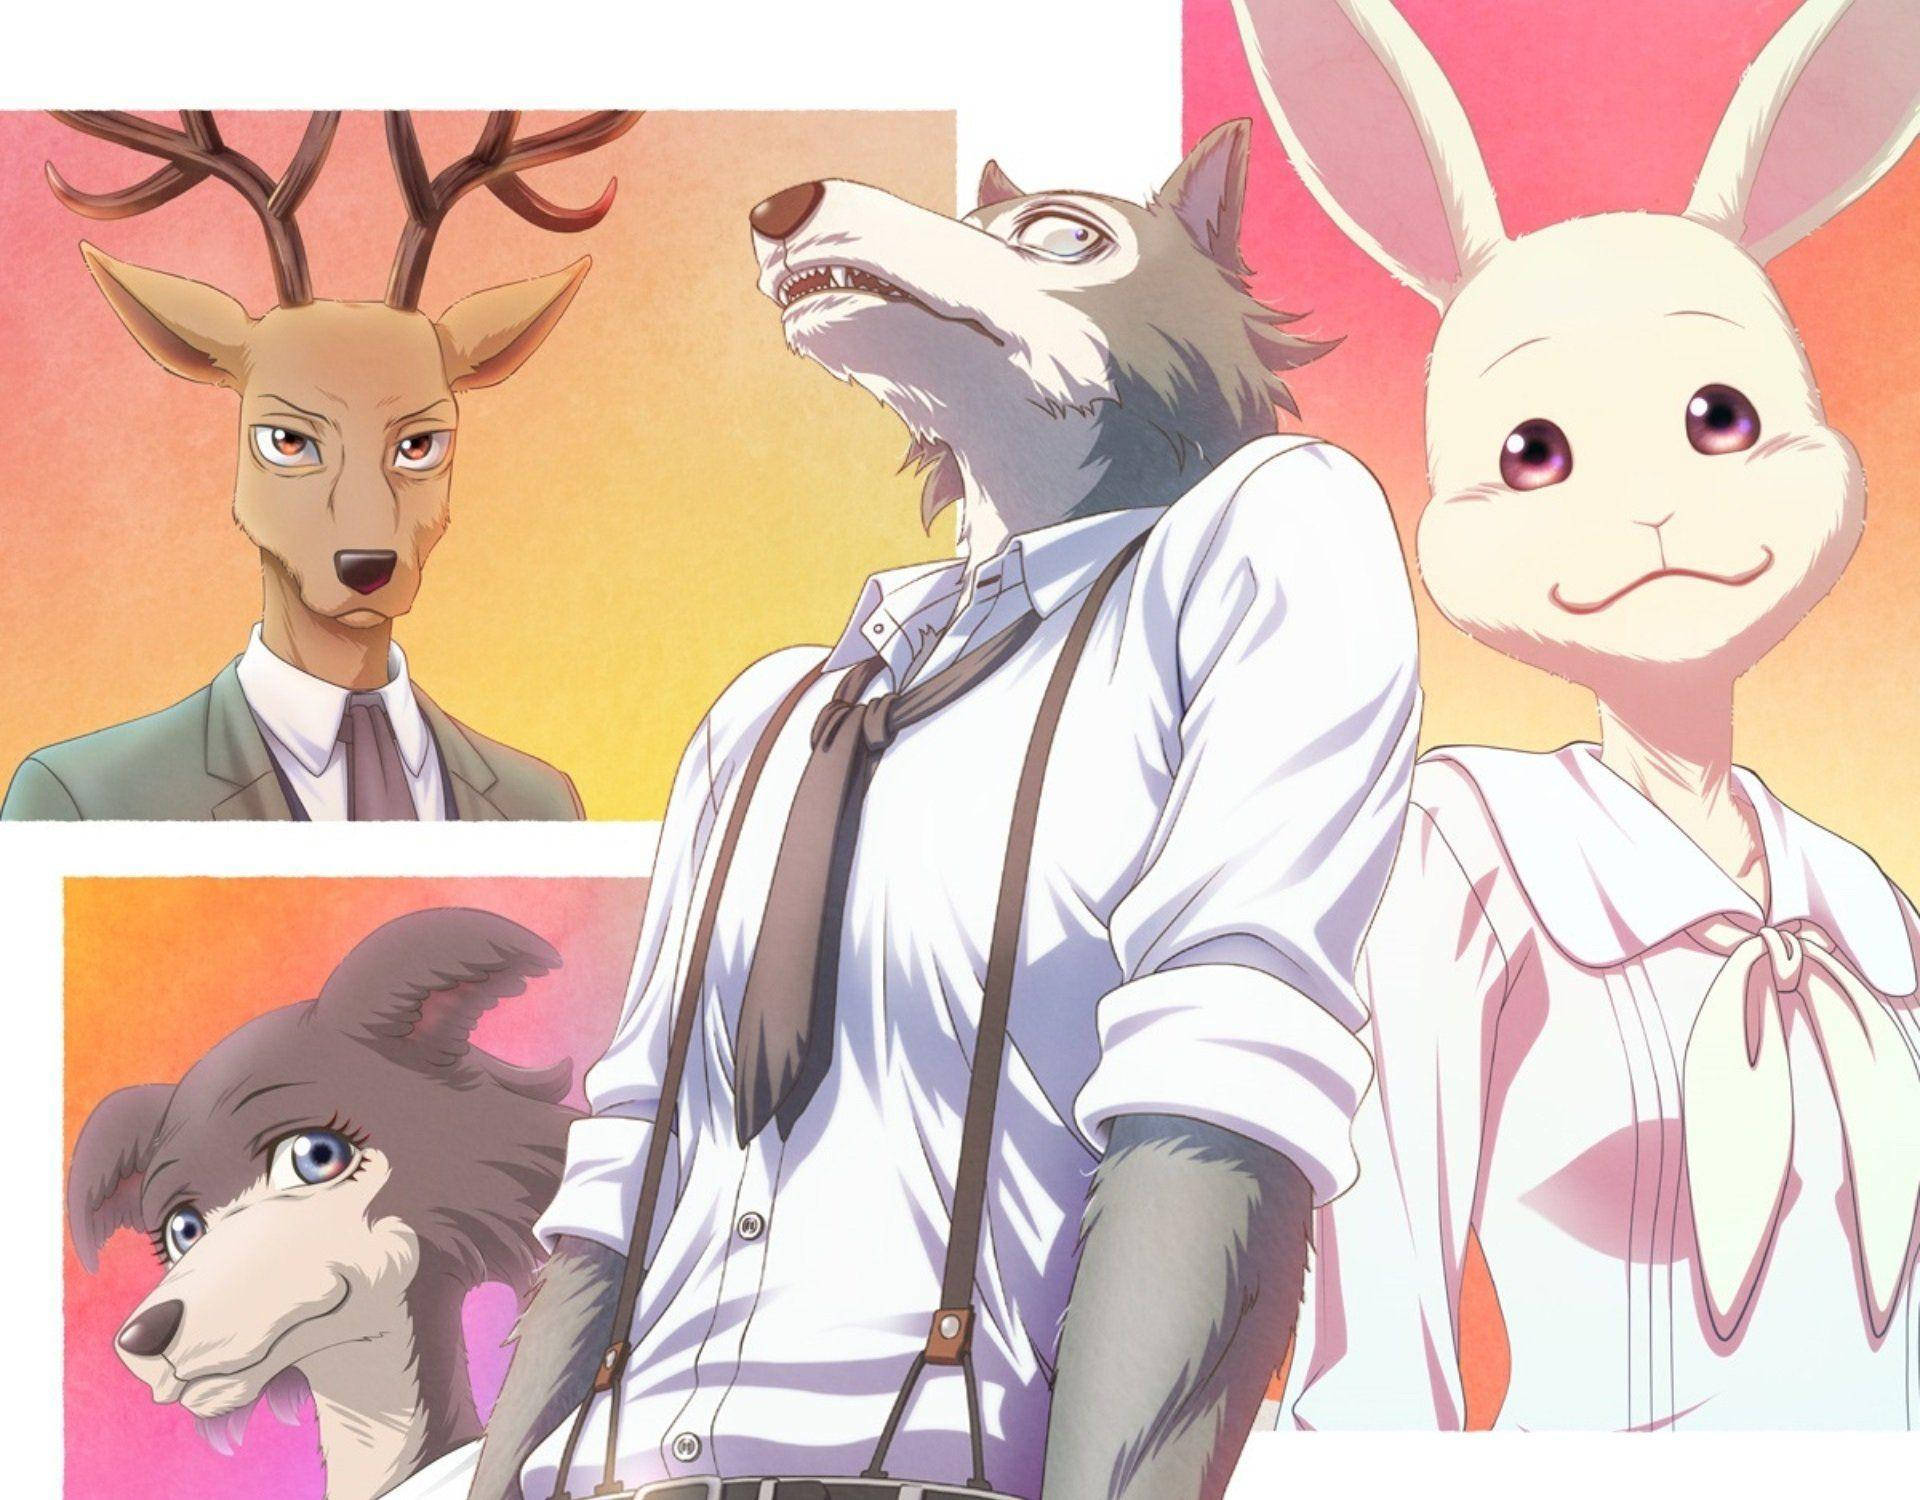 5 Life Lessons Learned From The Anime Beastars